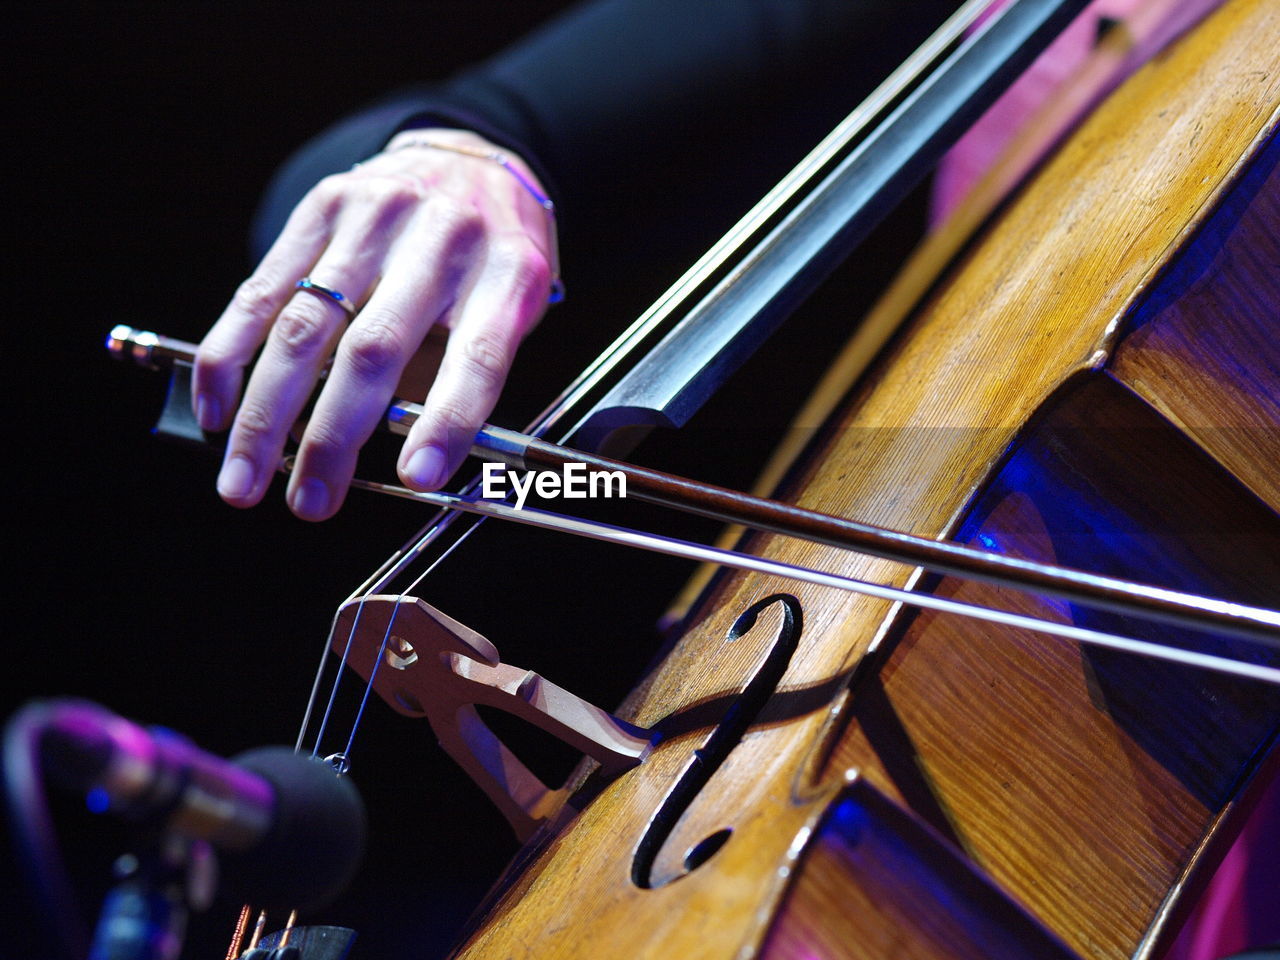 Hand playing cello strings at classical concert